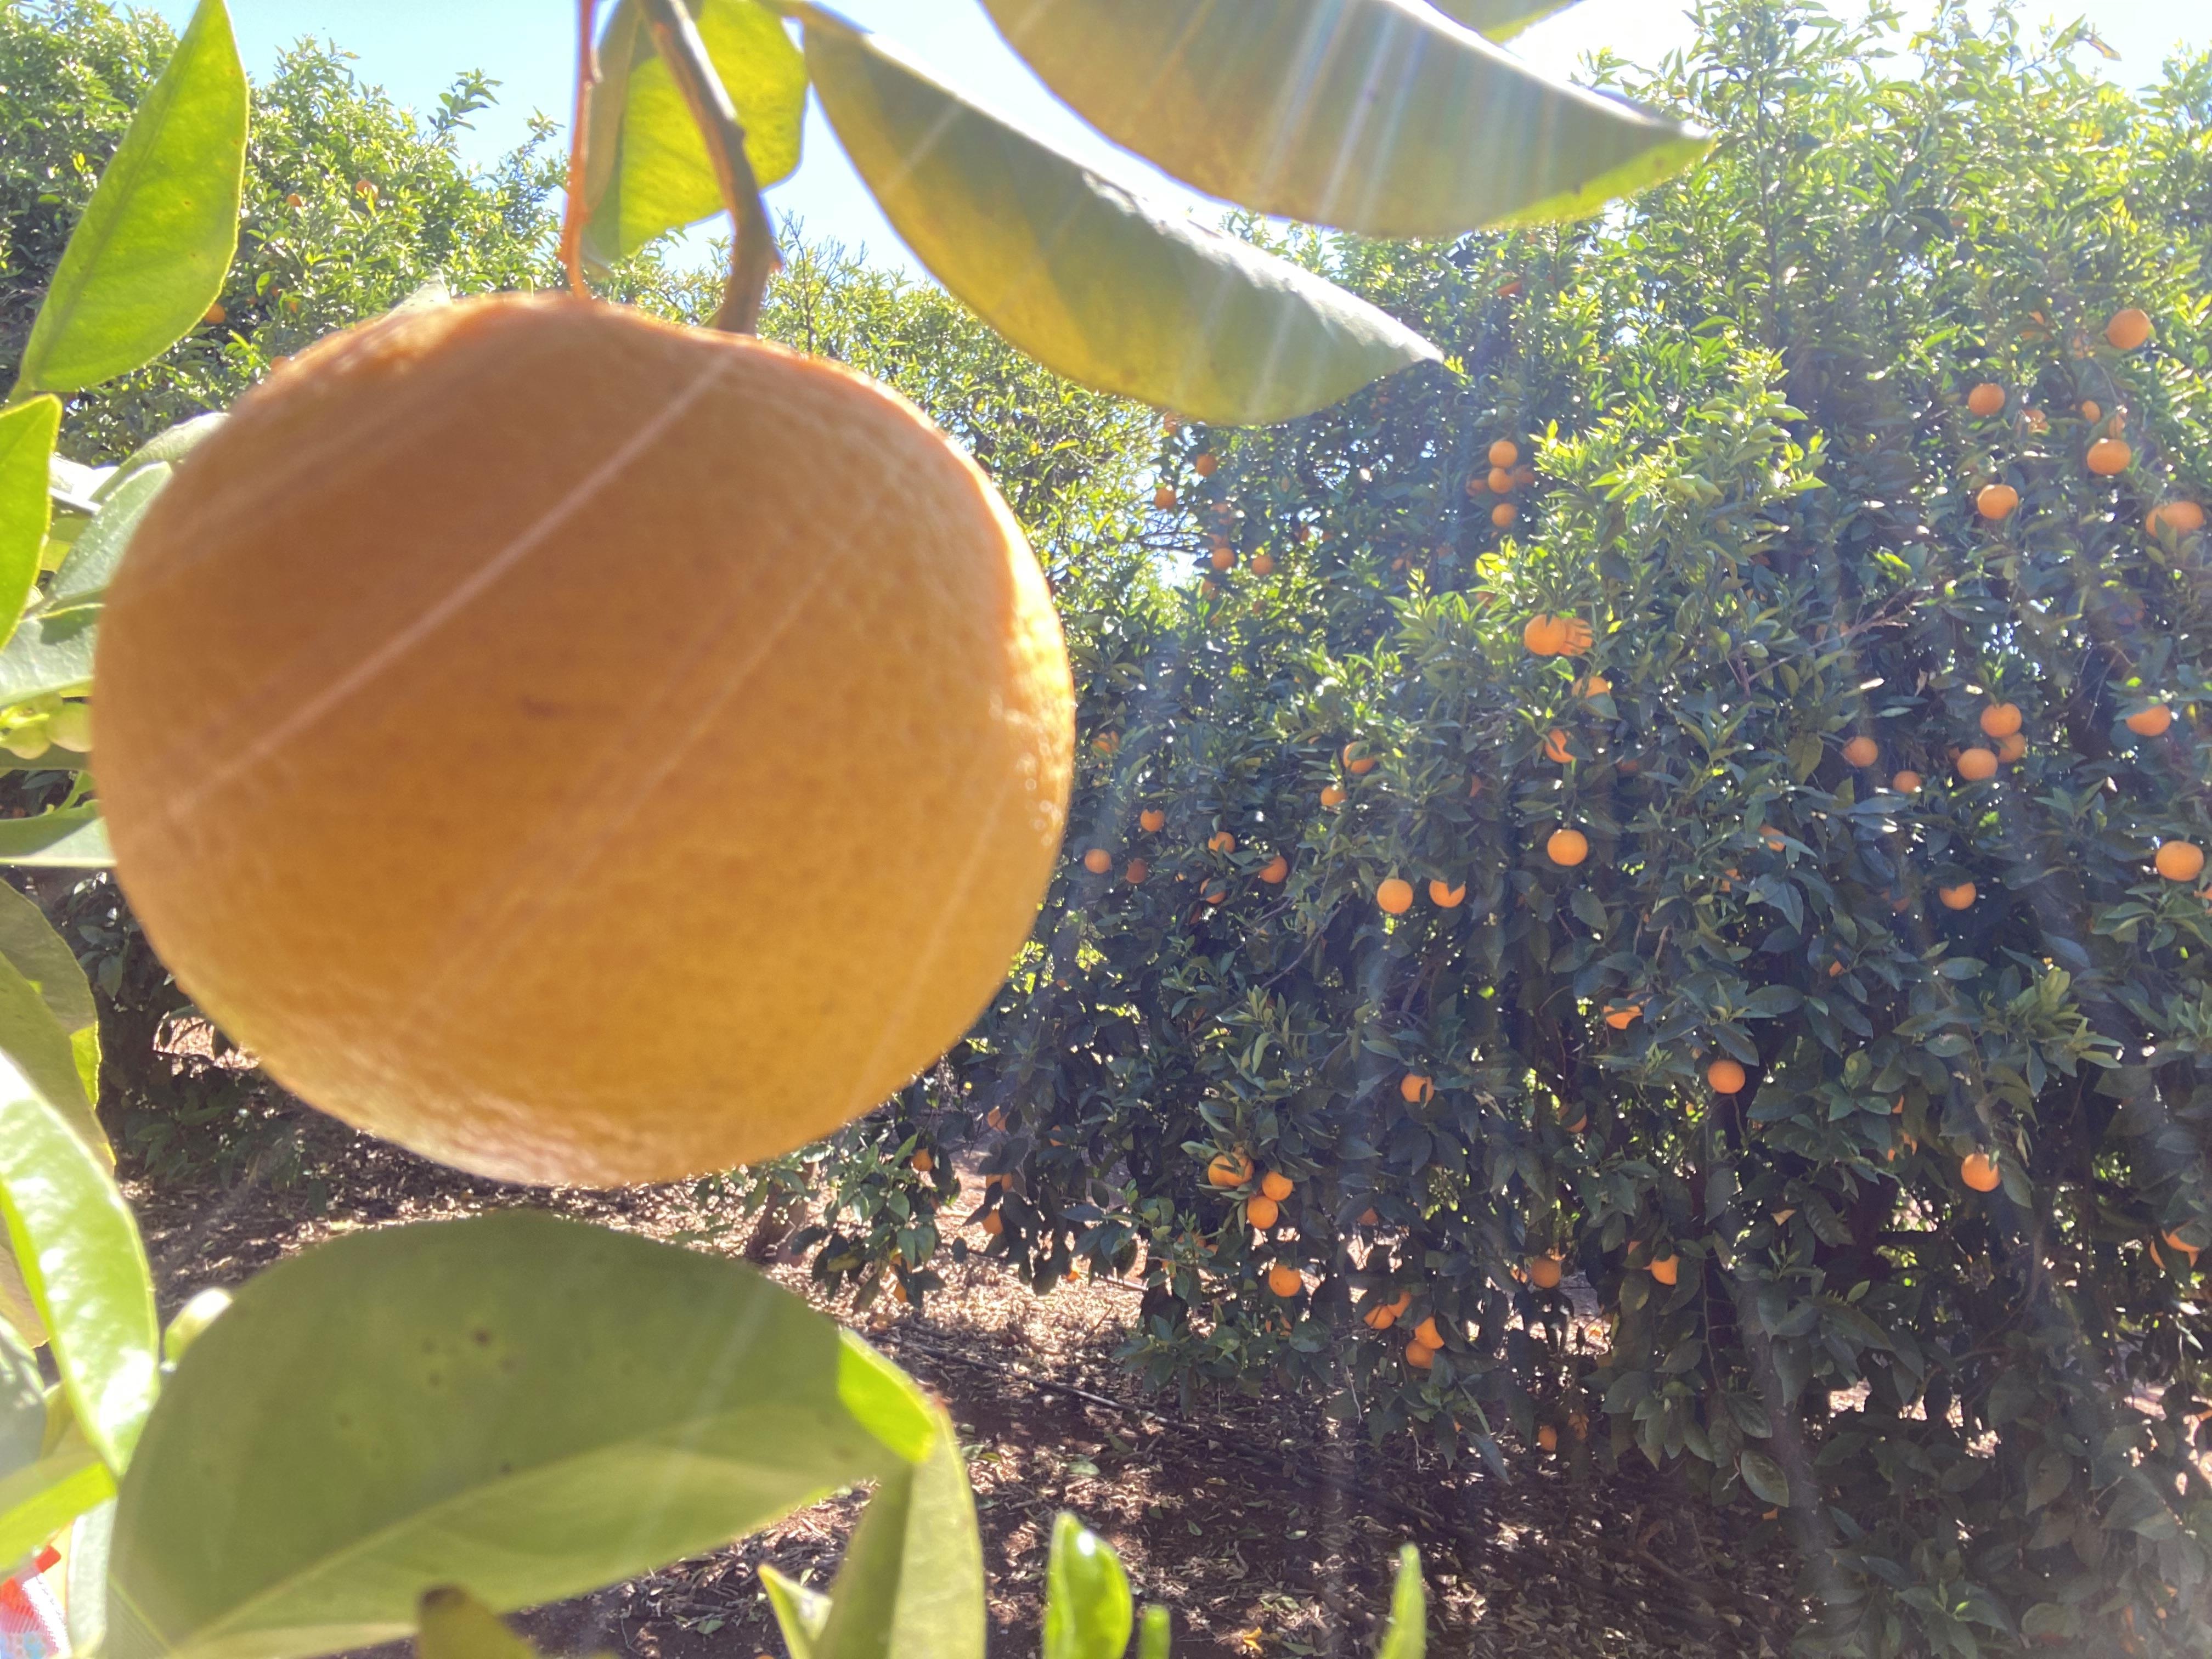 Oranges foreground and background